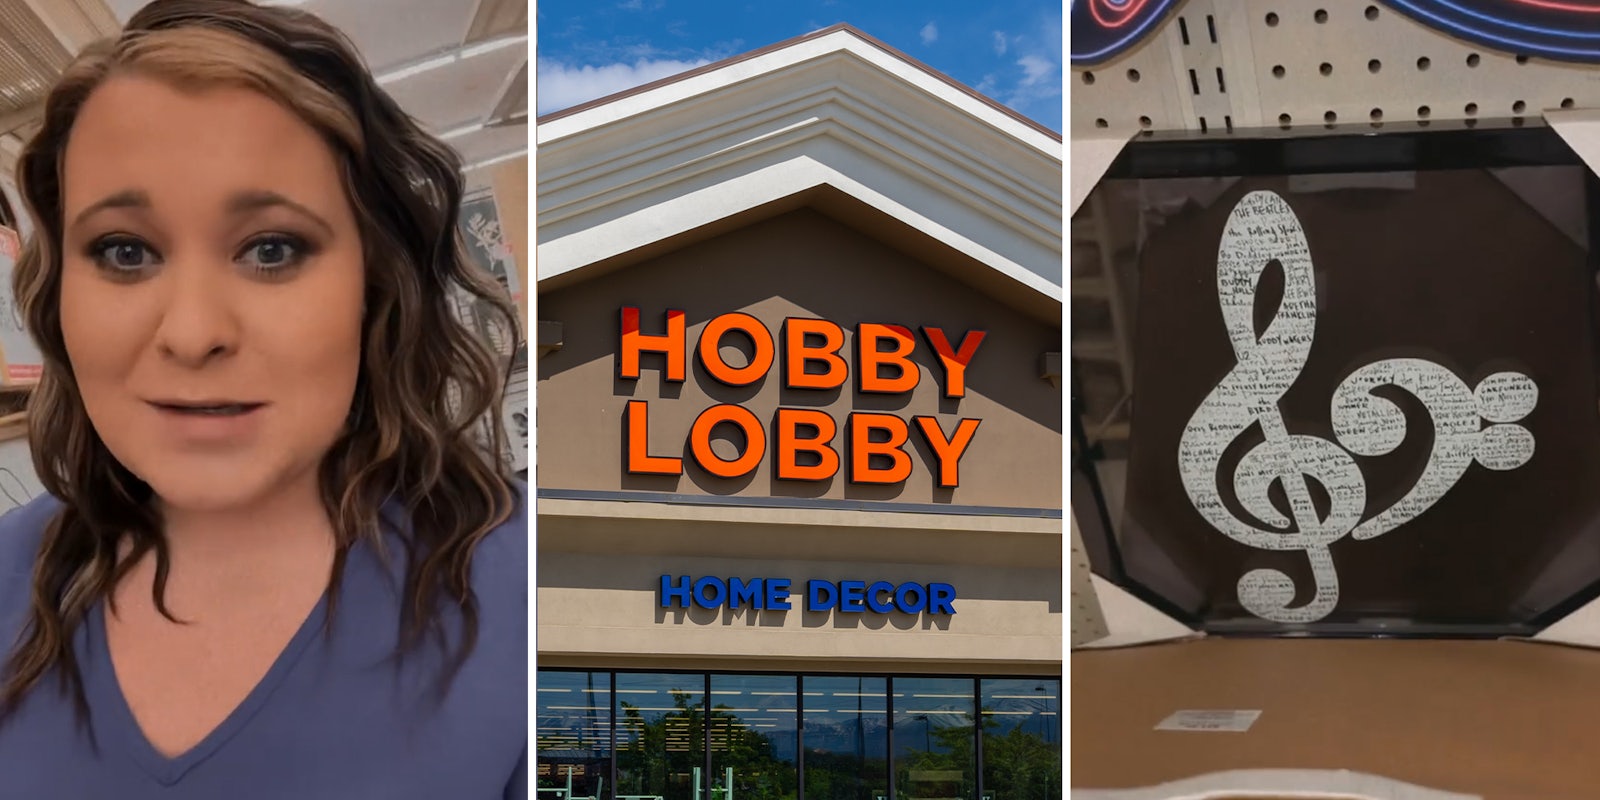 Woman shares how you might be getting scammed at Hobby Lobby, shows how same exact items are priced differently